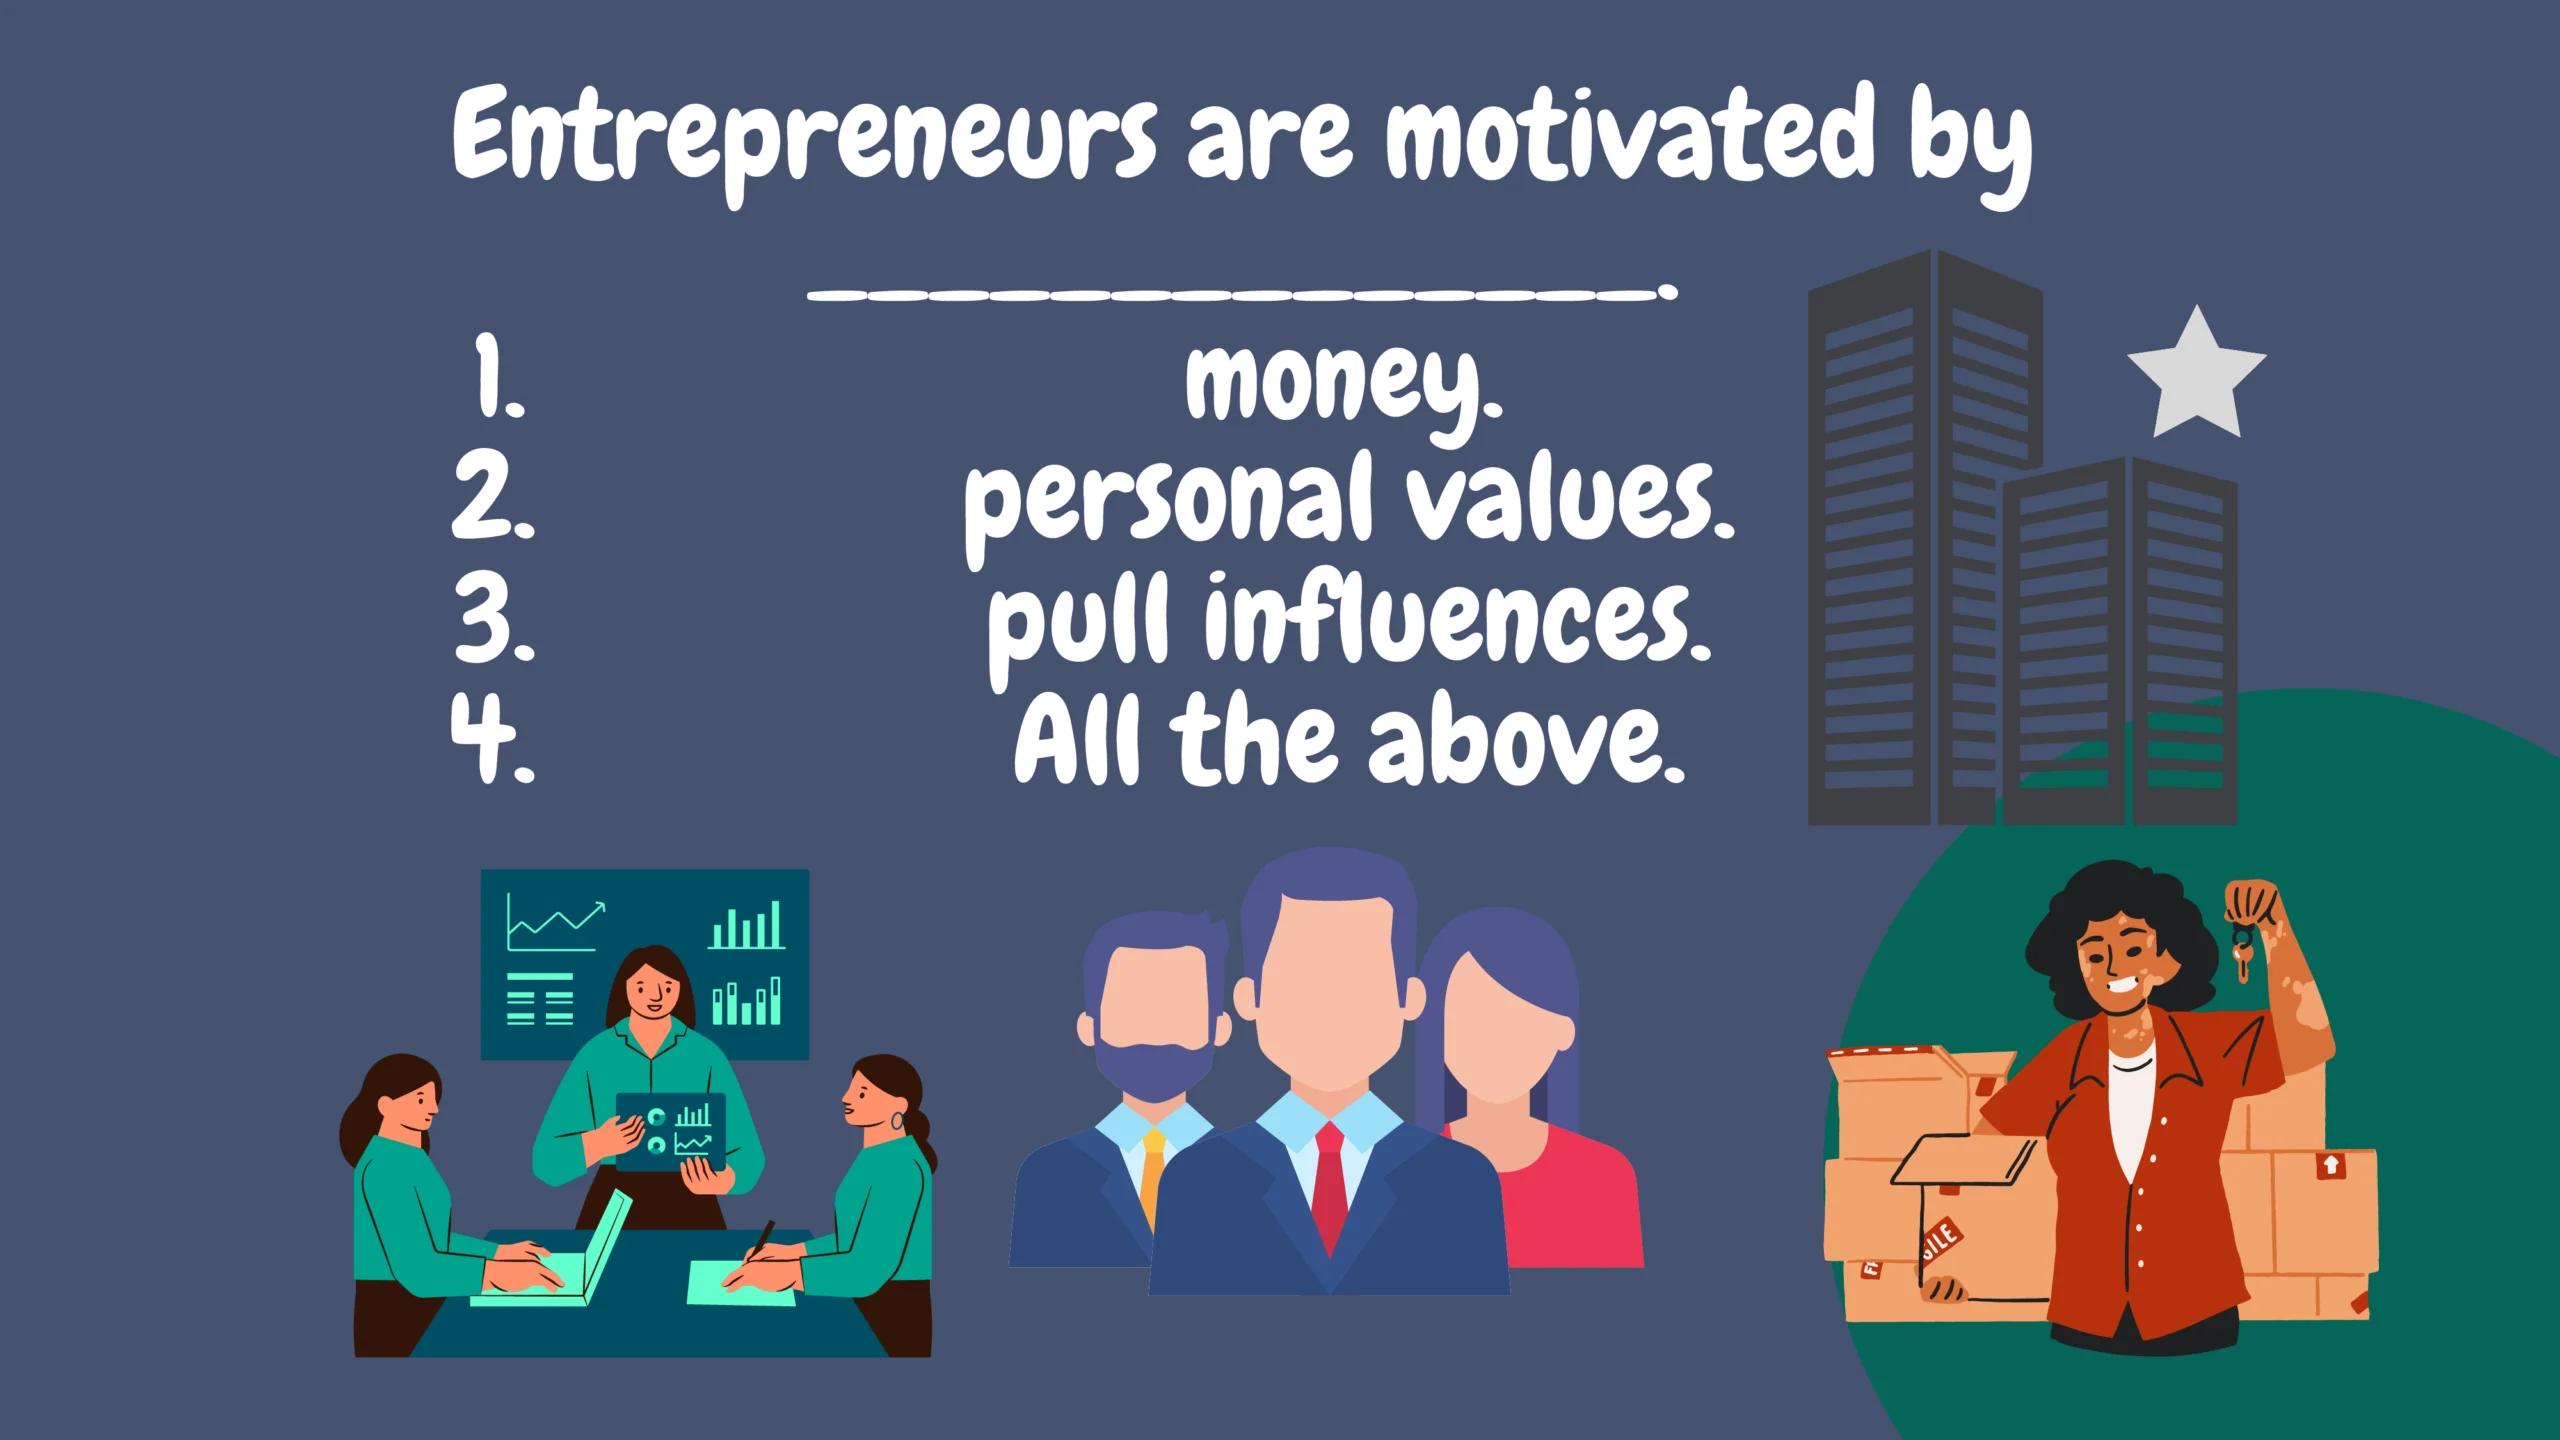 Entrepreneurs are motivated by